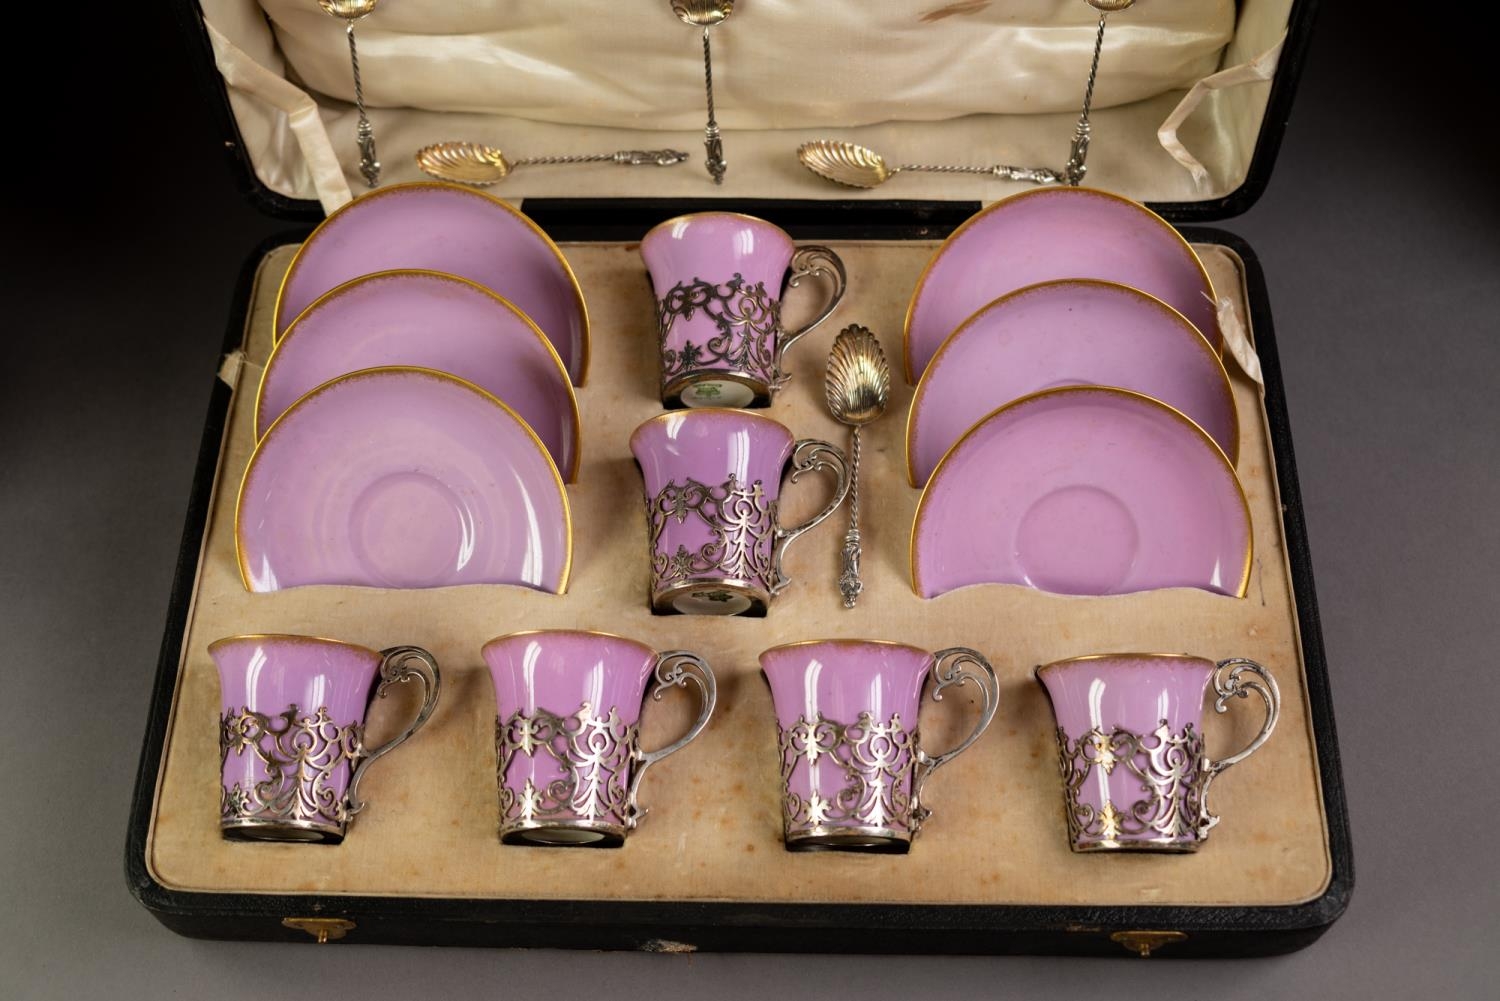 EARLY 20th CENTURY CASED SET OF SIX AYNSLEY PORCELAIN COFFEE CUPS AND SAUCERS, the cups removable - Image 2 of 4